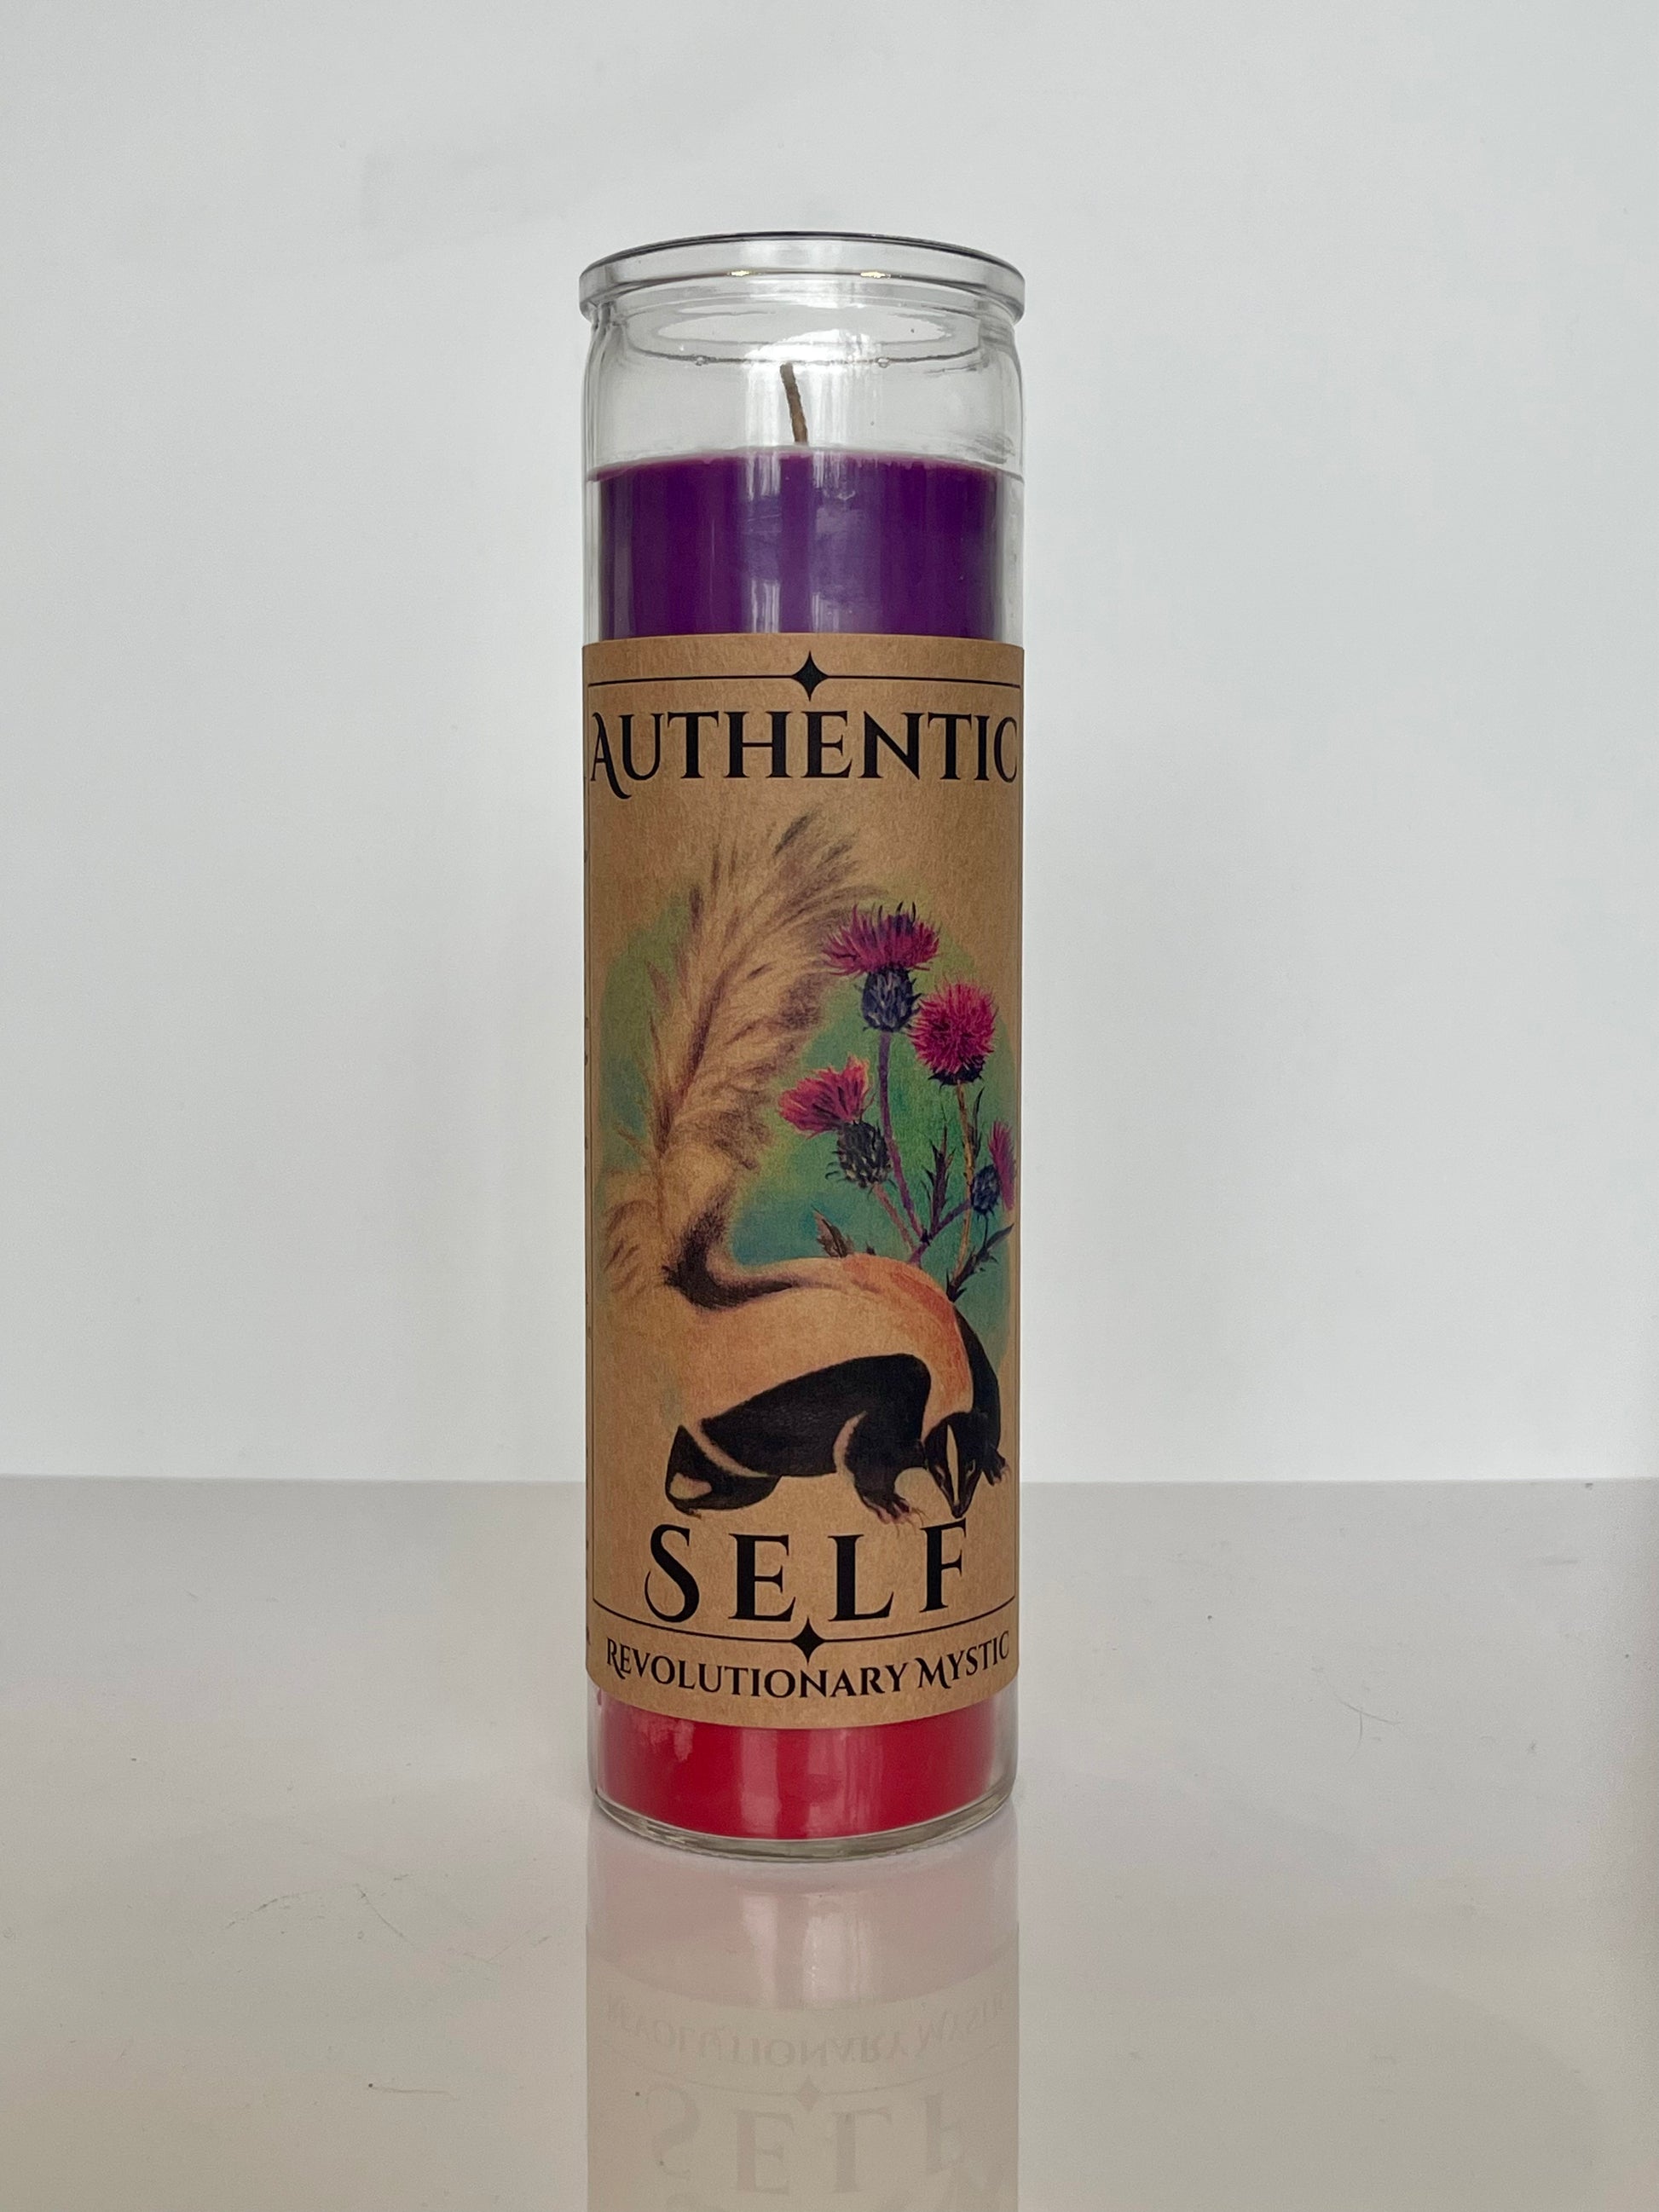 Authentic Self Candle - Revolutionary Mystic